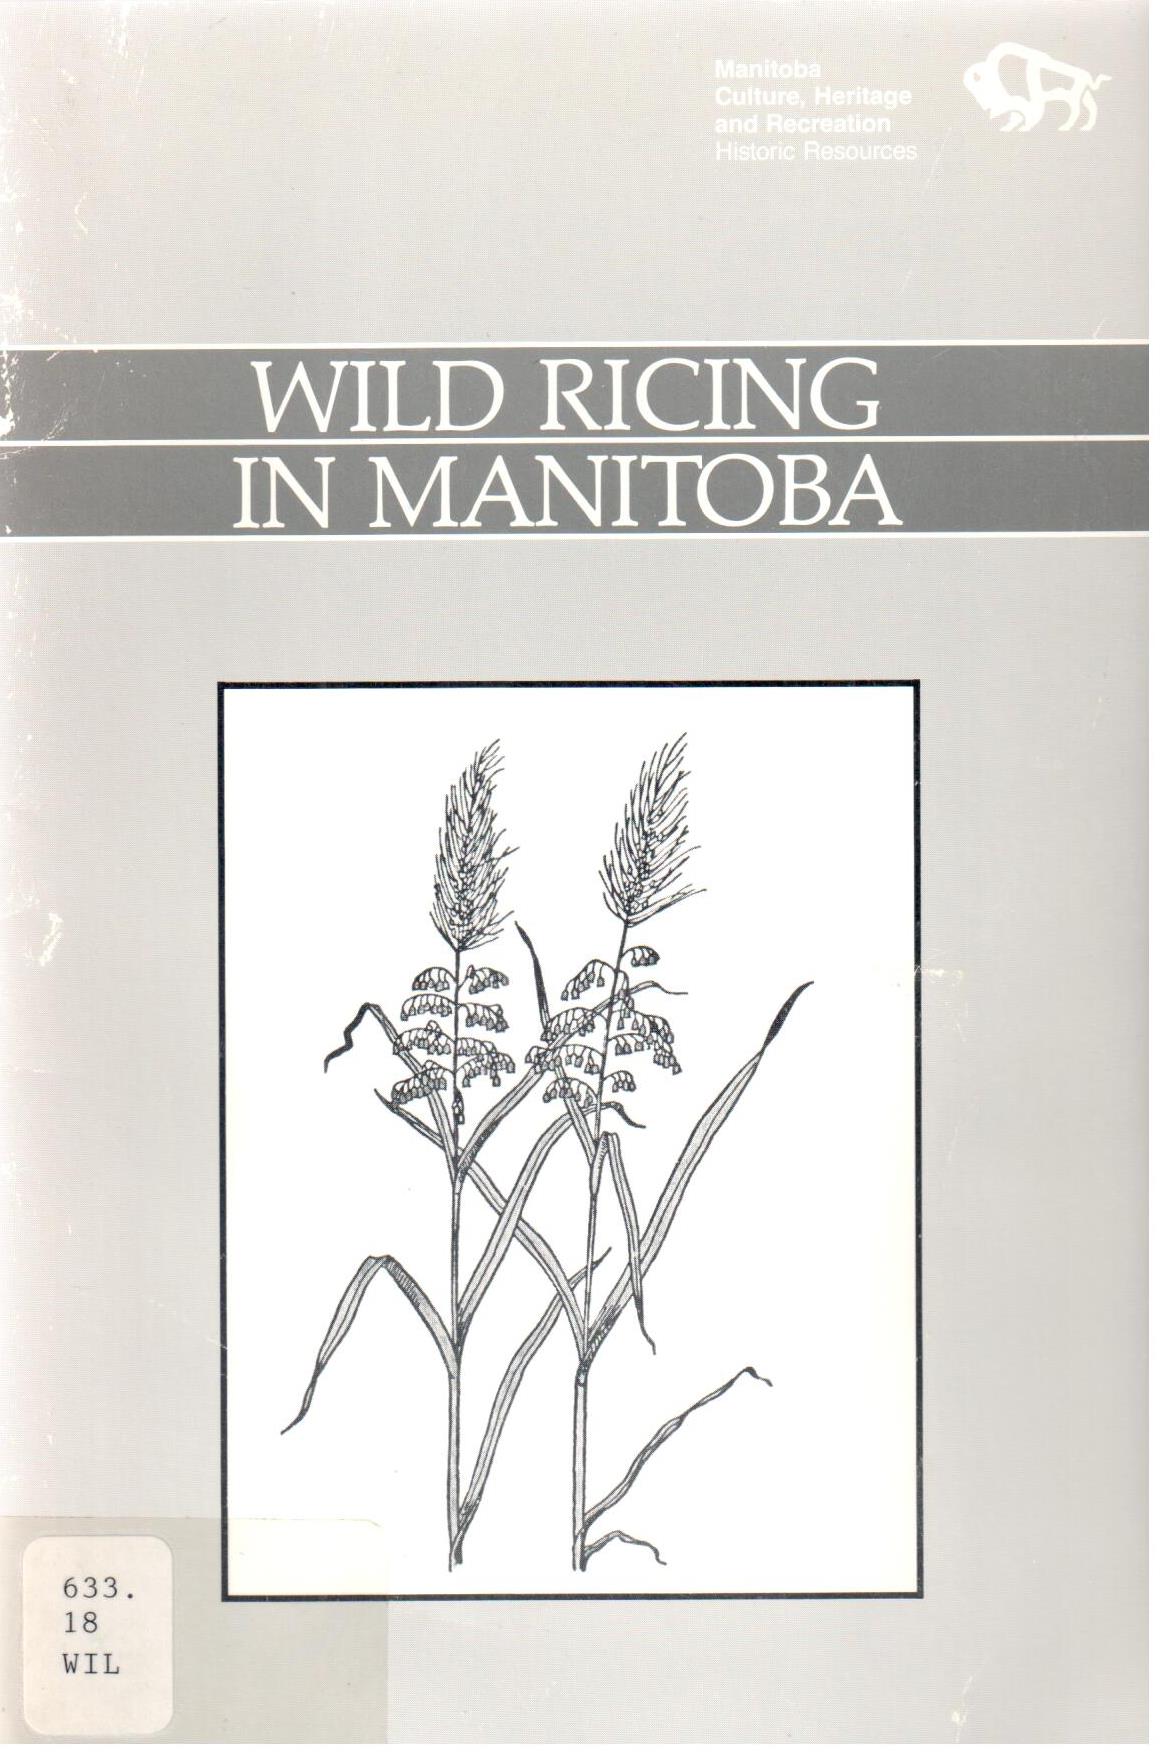 Wild ricing in Manitoba